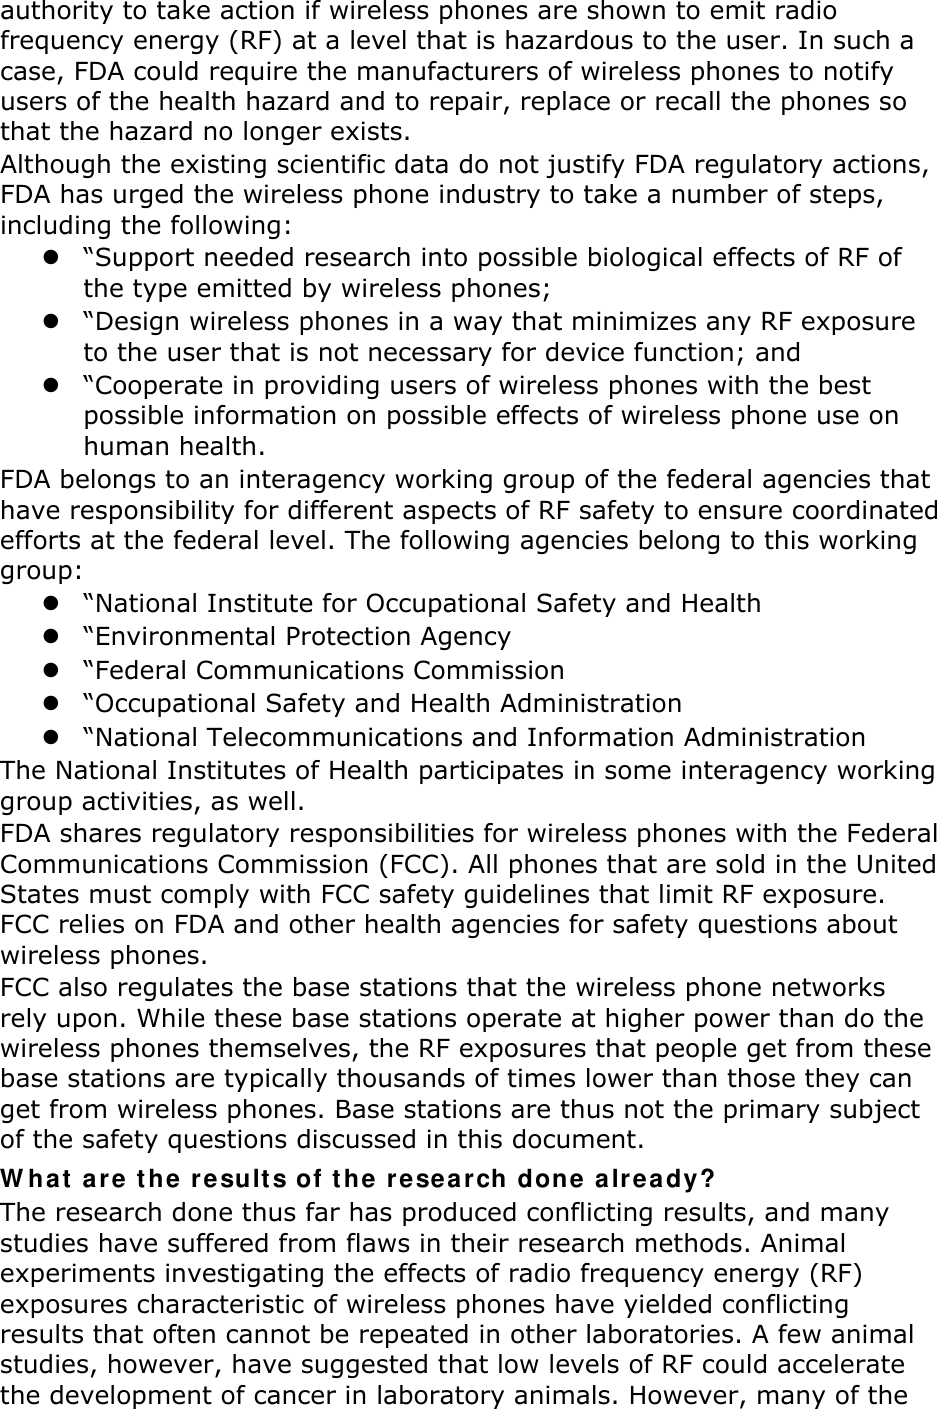 authority to take action if wireless phones are shown to emit radio frequency energy (RF) at a level that is hazardous to the user. In such a case, FDA could require the manufacturers of wireless phones to notify users of the health hazard and to repair, replace or recall the phones so that the hazard no longer exists. Although the existing scientific data do not justify FDA regulatory actions, FDA has urged the wireless phone industry to take a number of steps, including the following:  “Support needed research into possible biological effects of RF of the type emitted by wireless phones;  “Design wireless phones in a way that minimizes any RF exposure to the user that is not necessary for device function; and  “Cooperate in providing users of wireless phones with the best possible information on possible effects of wireless phone use on human health. FDA belongs to an interagency working group of the federal agencies that have responsibility for different aspects of RF safety to ensure coordinated efforts at the federal level. The following agencies belong to this working group:  “National Institute for Occupational Safety and Health  “Environmental Protection Agency  “Federal Communications Commission  “Occupational Safety and Health Administration  “National Telecommunications and Information Administration The National Institutes of Health participates in some interagency working group activities, as well. FDA shares regulatory responsibilities for wireless phones with the Federal Communications Commission (FCC). All phones that are sold in the United States must comply with FCC safety guidelines that limit RF exposure. FCC relies on FDA and other health agencies for safety questions about wireless phones. FCC also regulates the base stations that the wireless phone networks rely upon. While these base stations operate at higher power than do the wireless phones themselves, the RF exposures that people get from these base stations are typically thousands of times lower than those they can get from wireless phones. Base stations are thus not the primary subject of the safety questions discussed in this document. What are the results of the research done already? The research done thus far has produced conflicting results, and many studies have suffered from flaws in their research methods. Animal experiments investigating the effects of radio frequency energy (RF) exposures characteristic of wireless phones have yielded conflicting results that often cannot be repeated in other laboratories. A few animal studies, however, have suggested that low levels of RF could accelerate the development of cancer in laboratory animals. However, many of the 